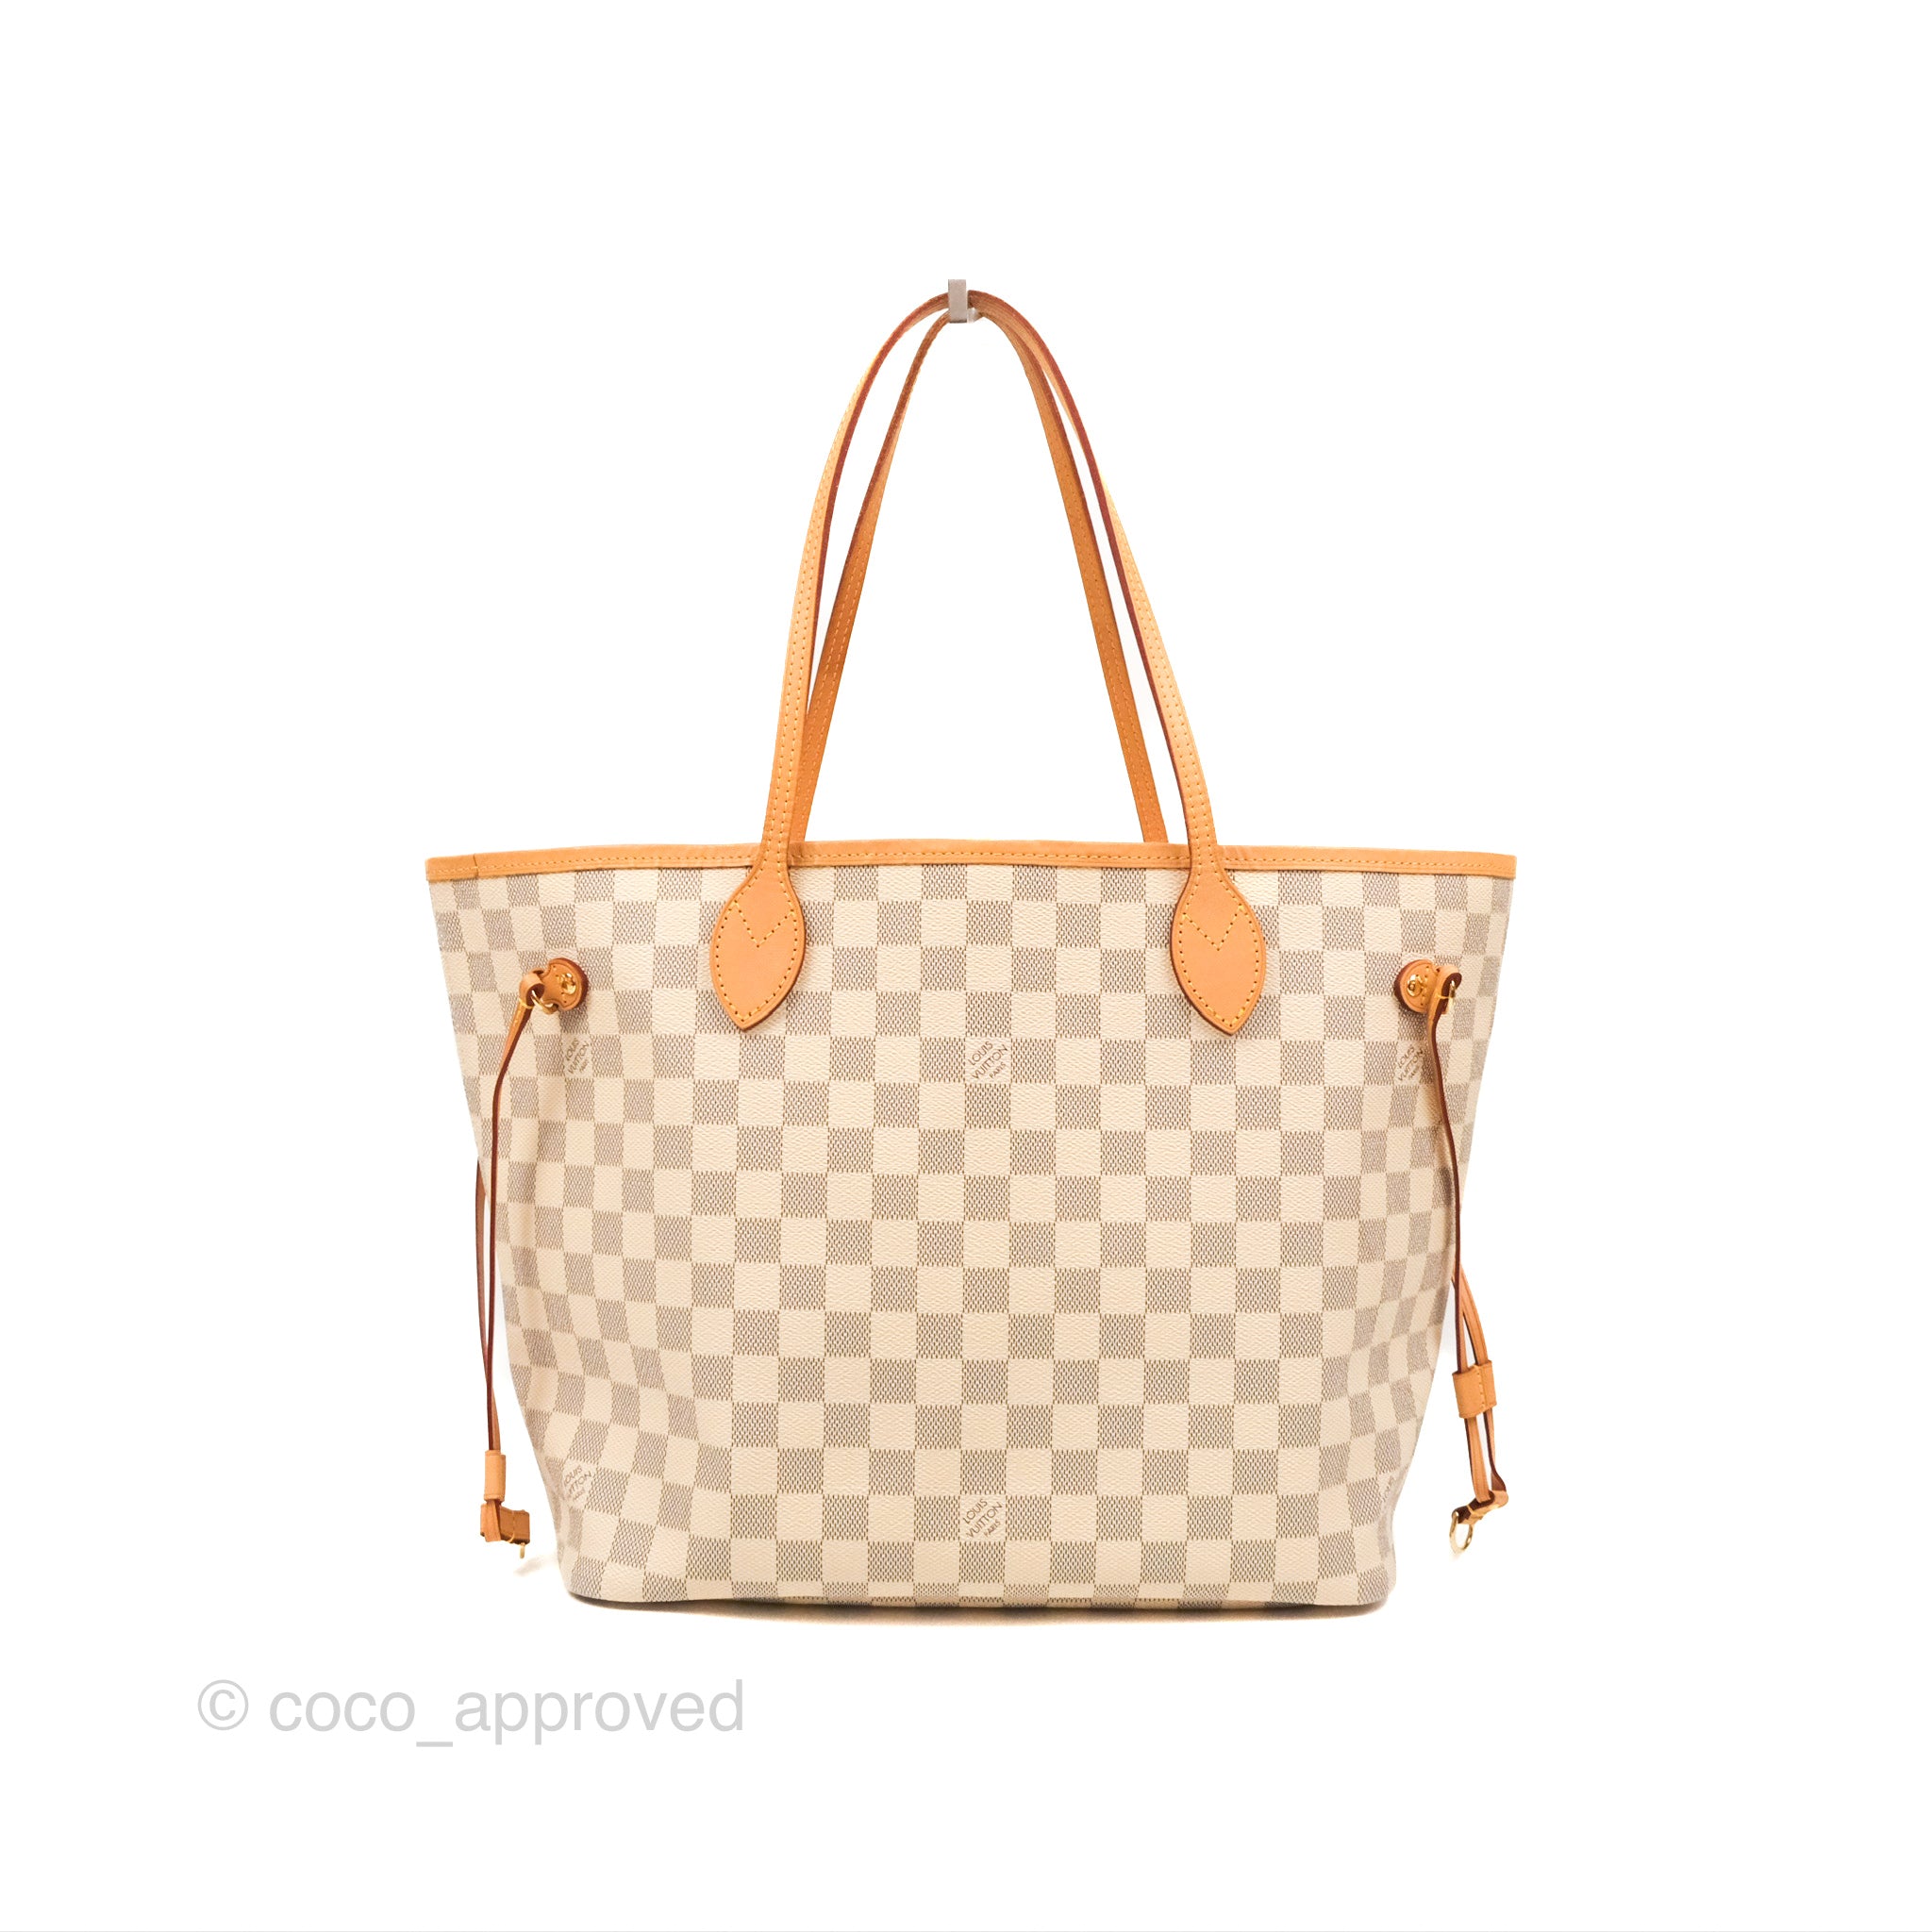 Check out this LV Damien Azur Neverfull MM Tote! The pink inside